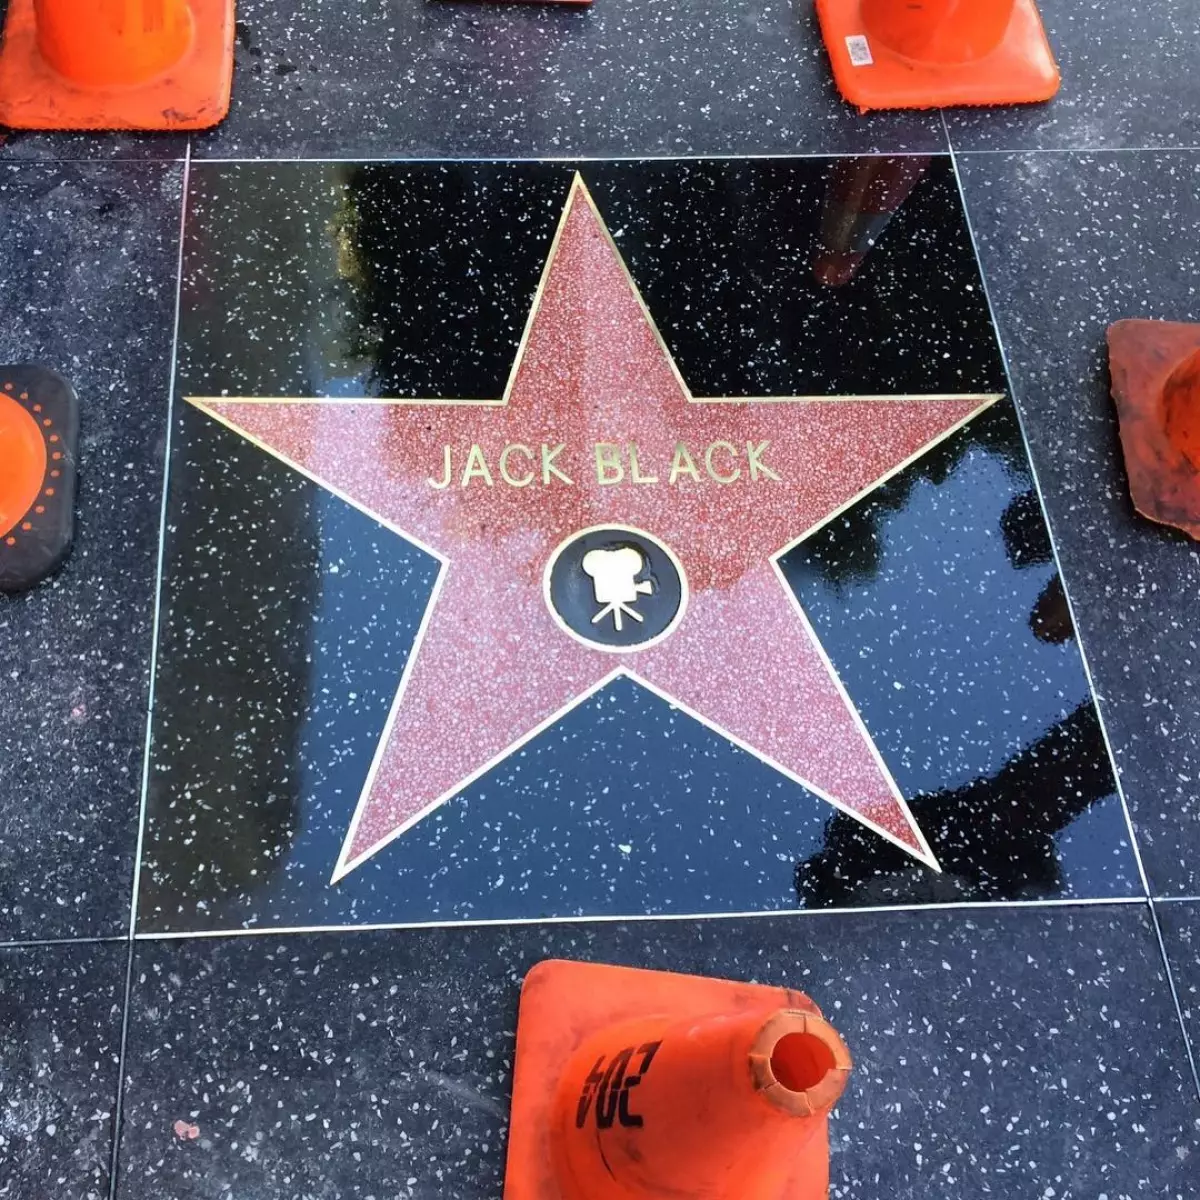 Jack Black was inducted into the Hollywood Walk of Fame last year.